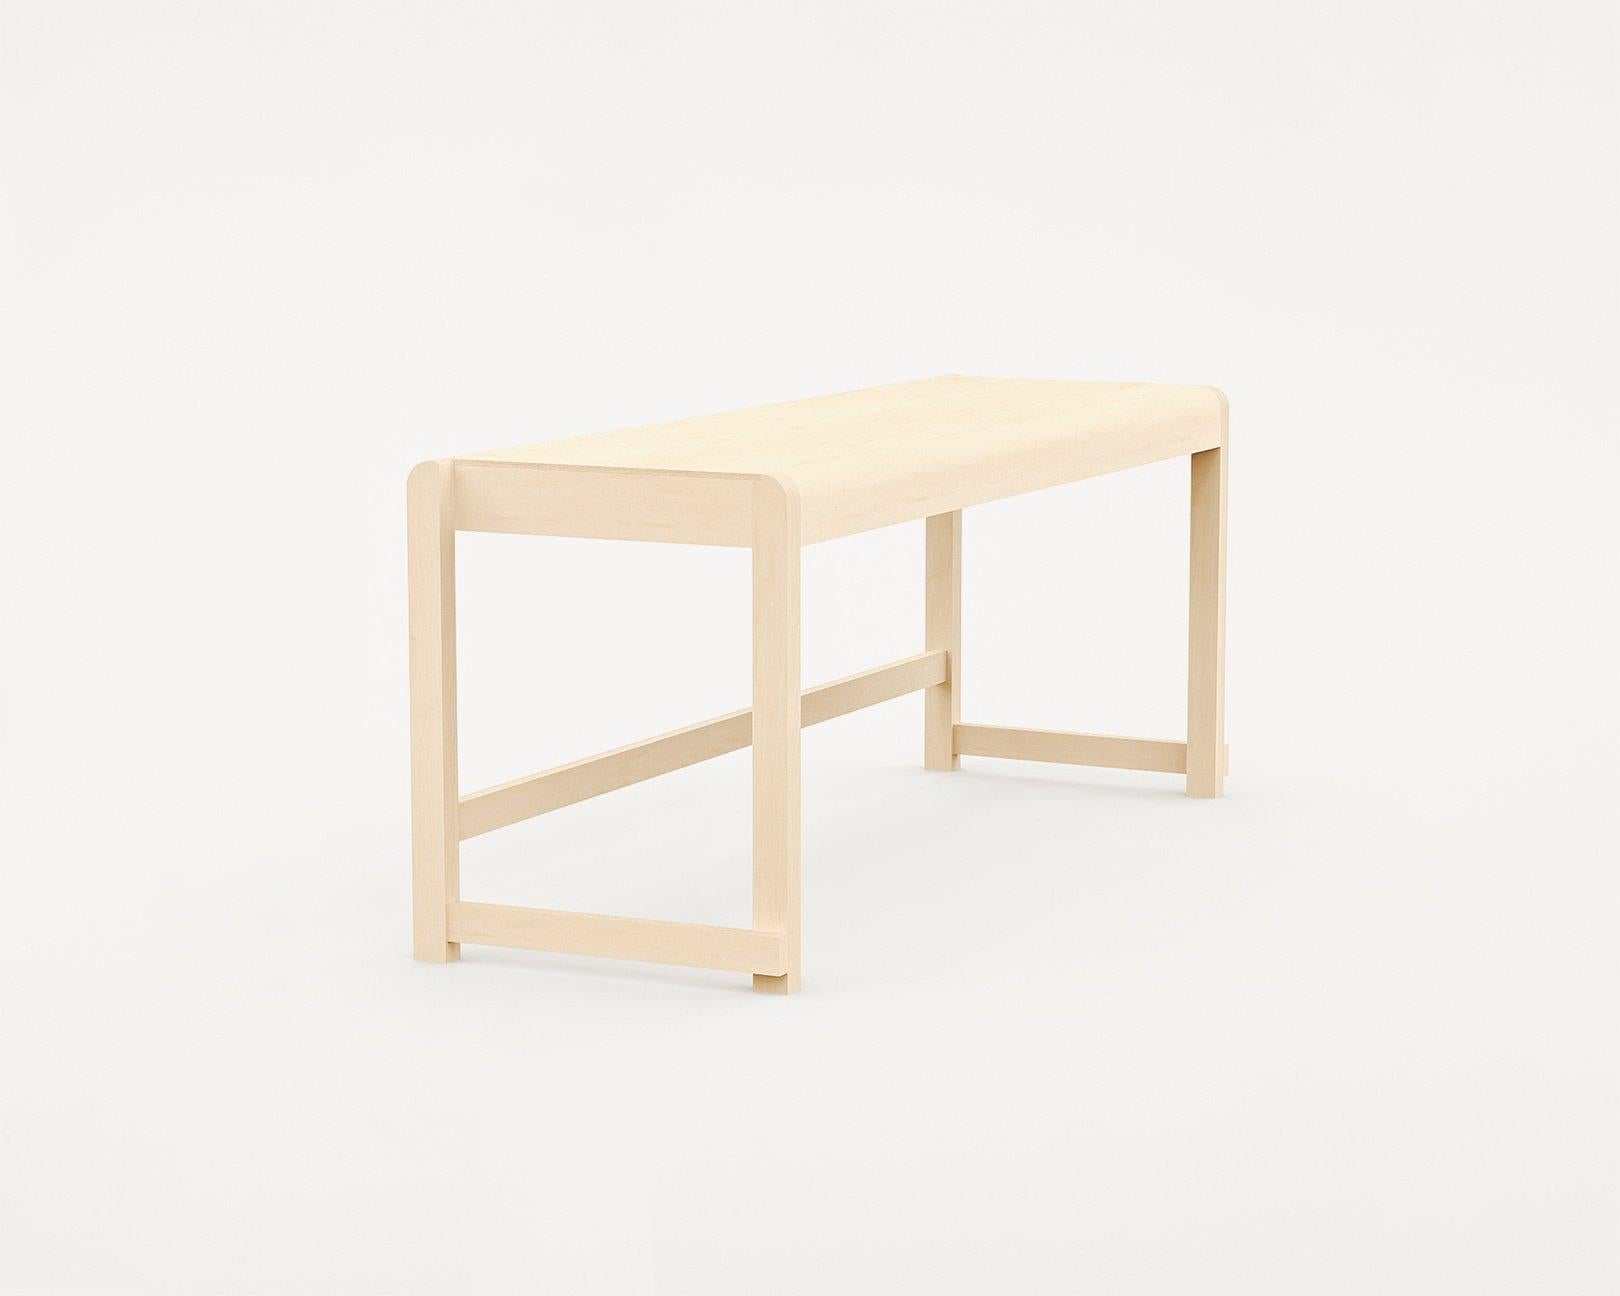 Contemporary Minimal Scandinavian Design Bench 01 in Natural Wood For Sale